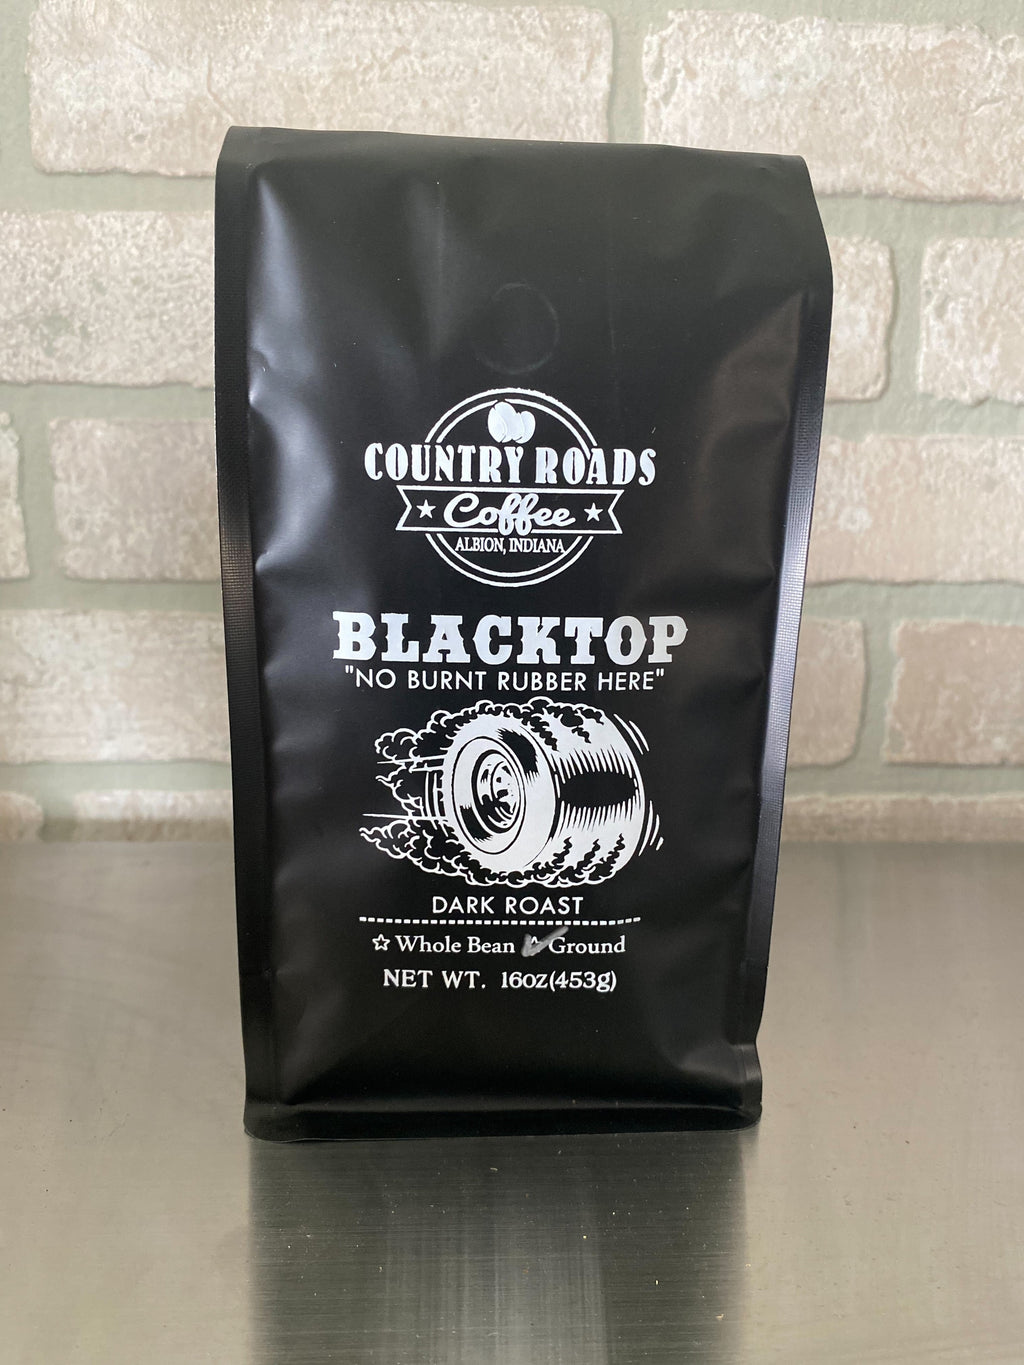 This is an image of our dark roast called Blacktop. No burnt rubber here